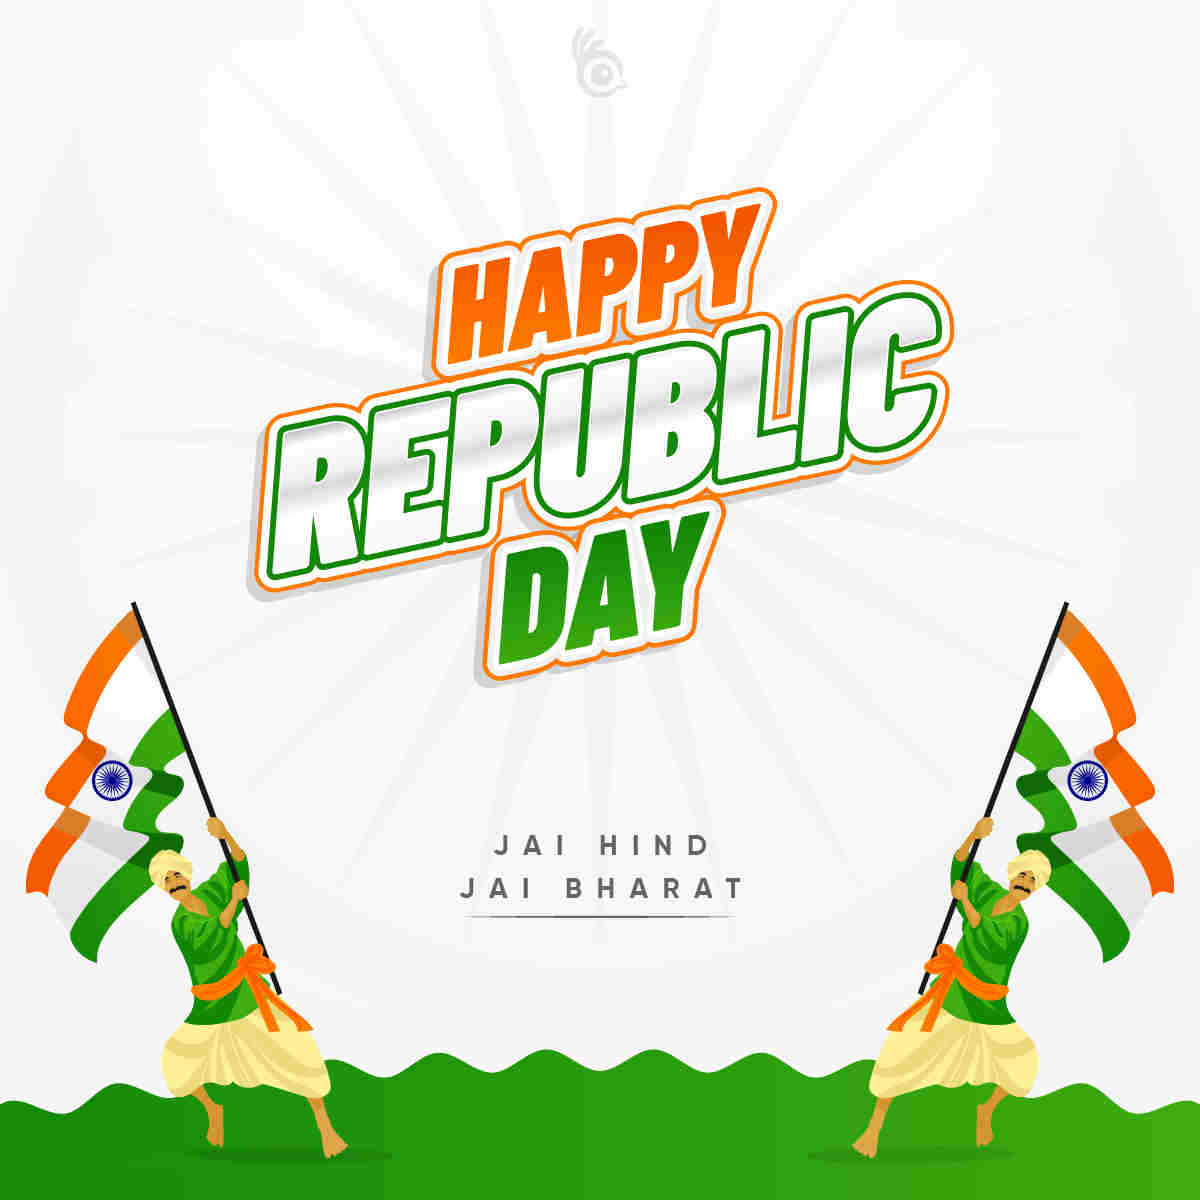 Happy Republic Day, Wishes, Image, Messages, Picture, and Photo